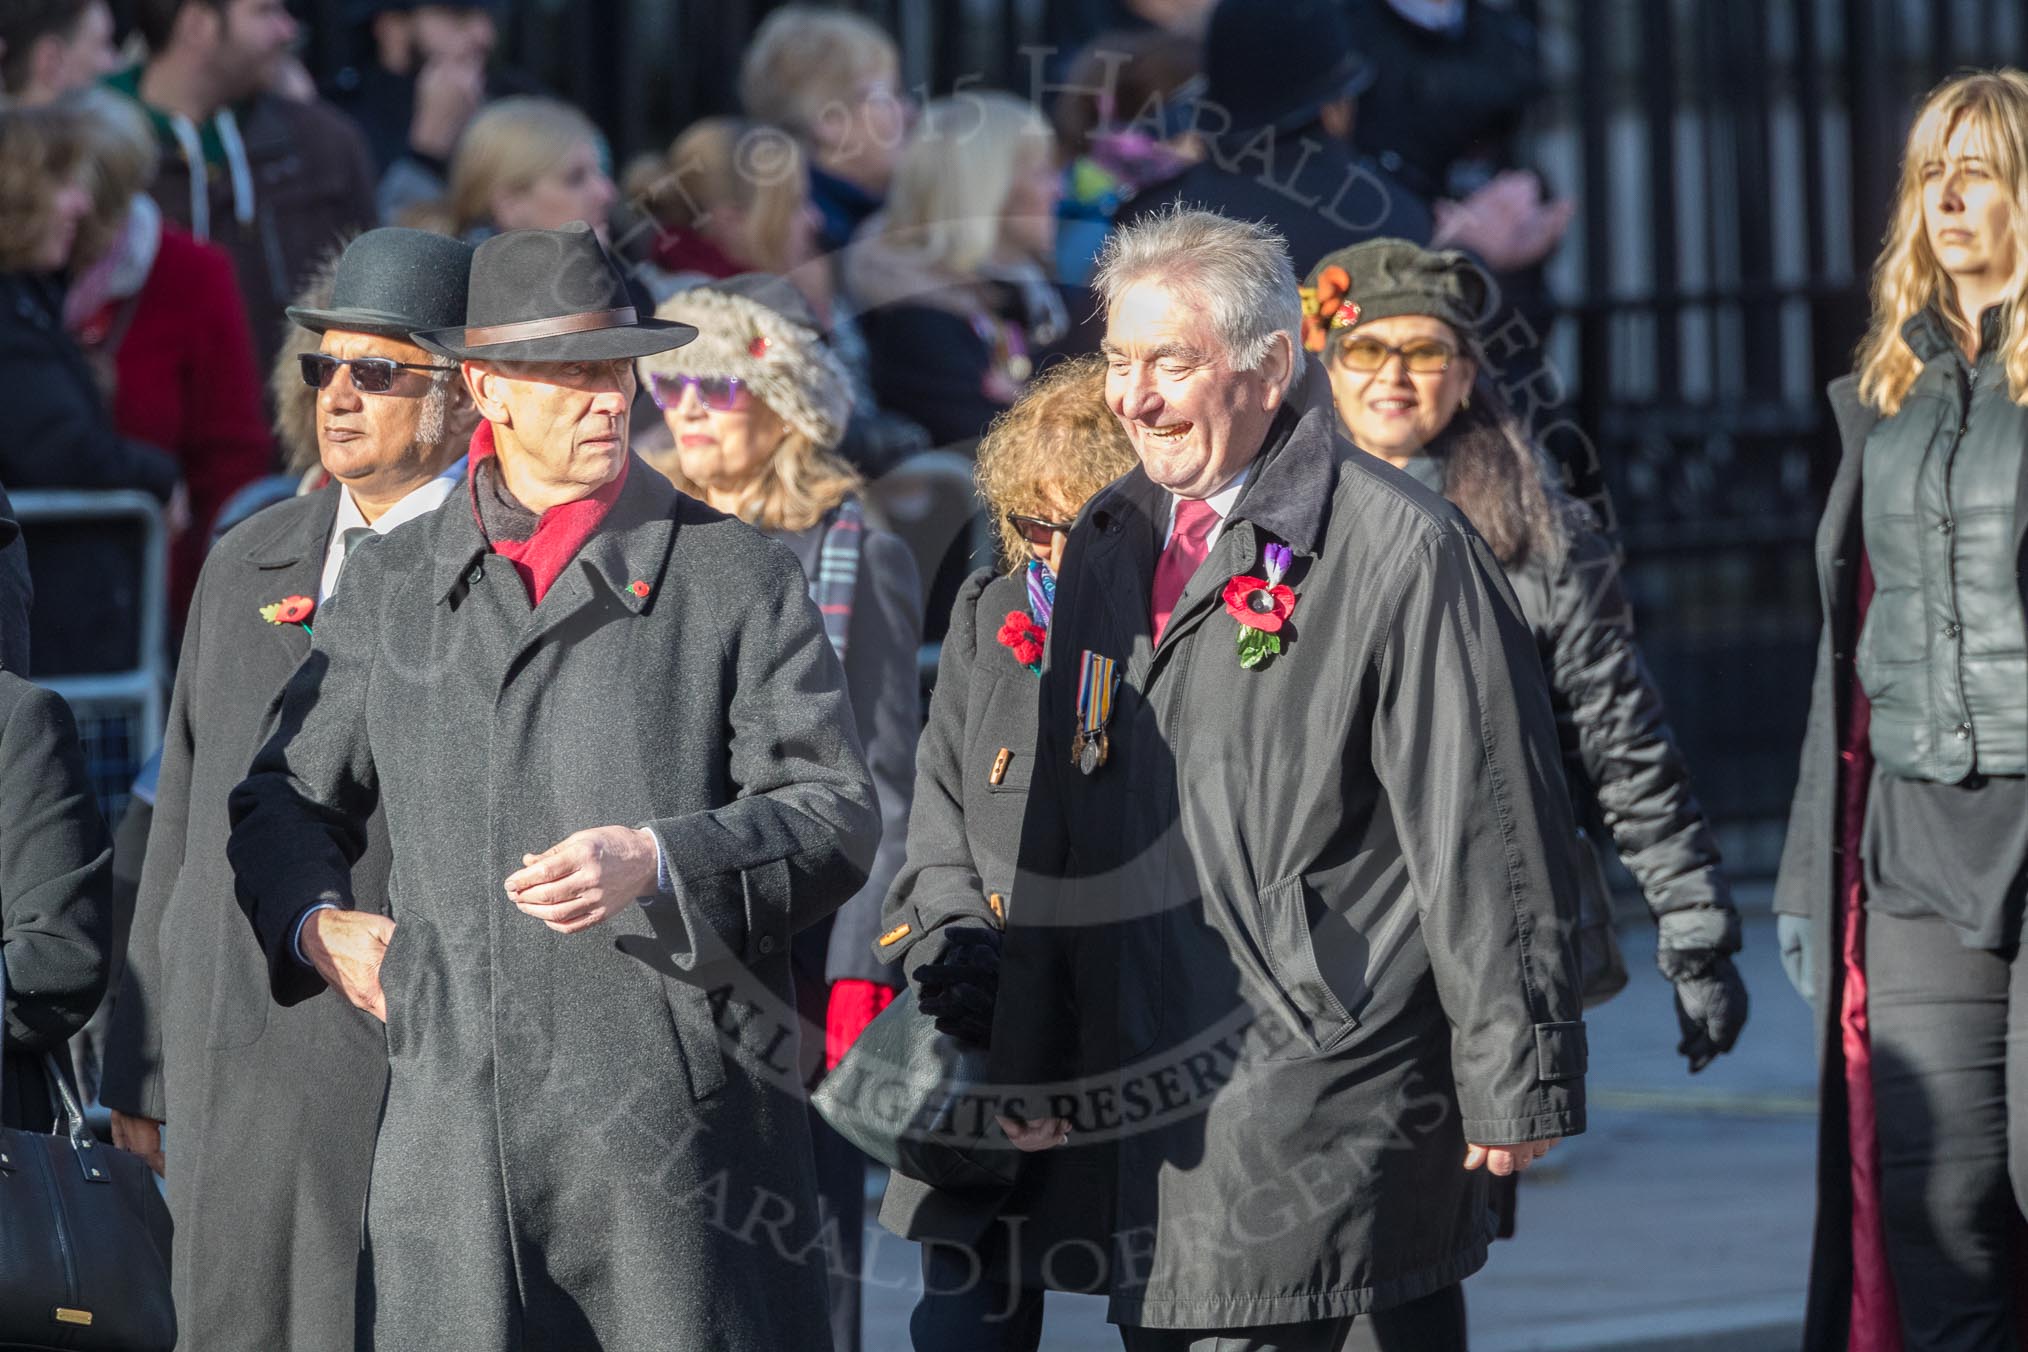 March Past, Remembrance Sunday at the Cenotaph 2016: M30 Equity.
Cenotaph, Whitehall, London SW1,
London,
Greater London,
United Kingdom,
on 13 November 2016 at 13:17, image #2762